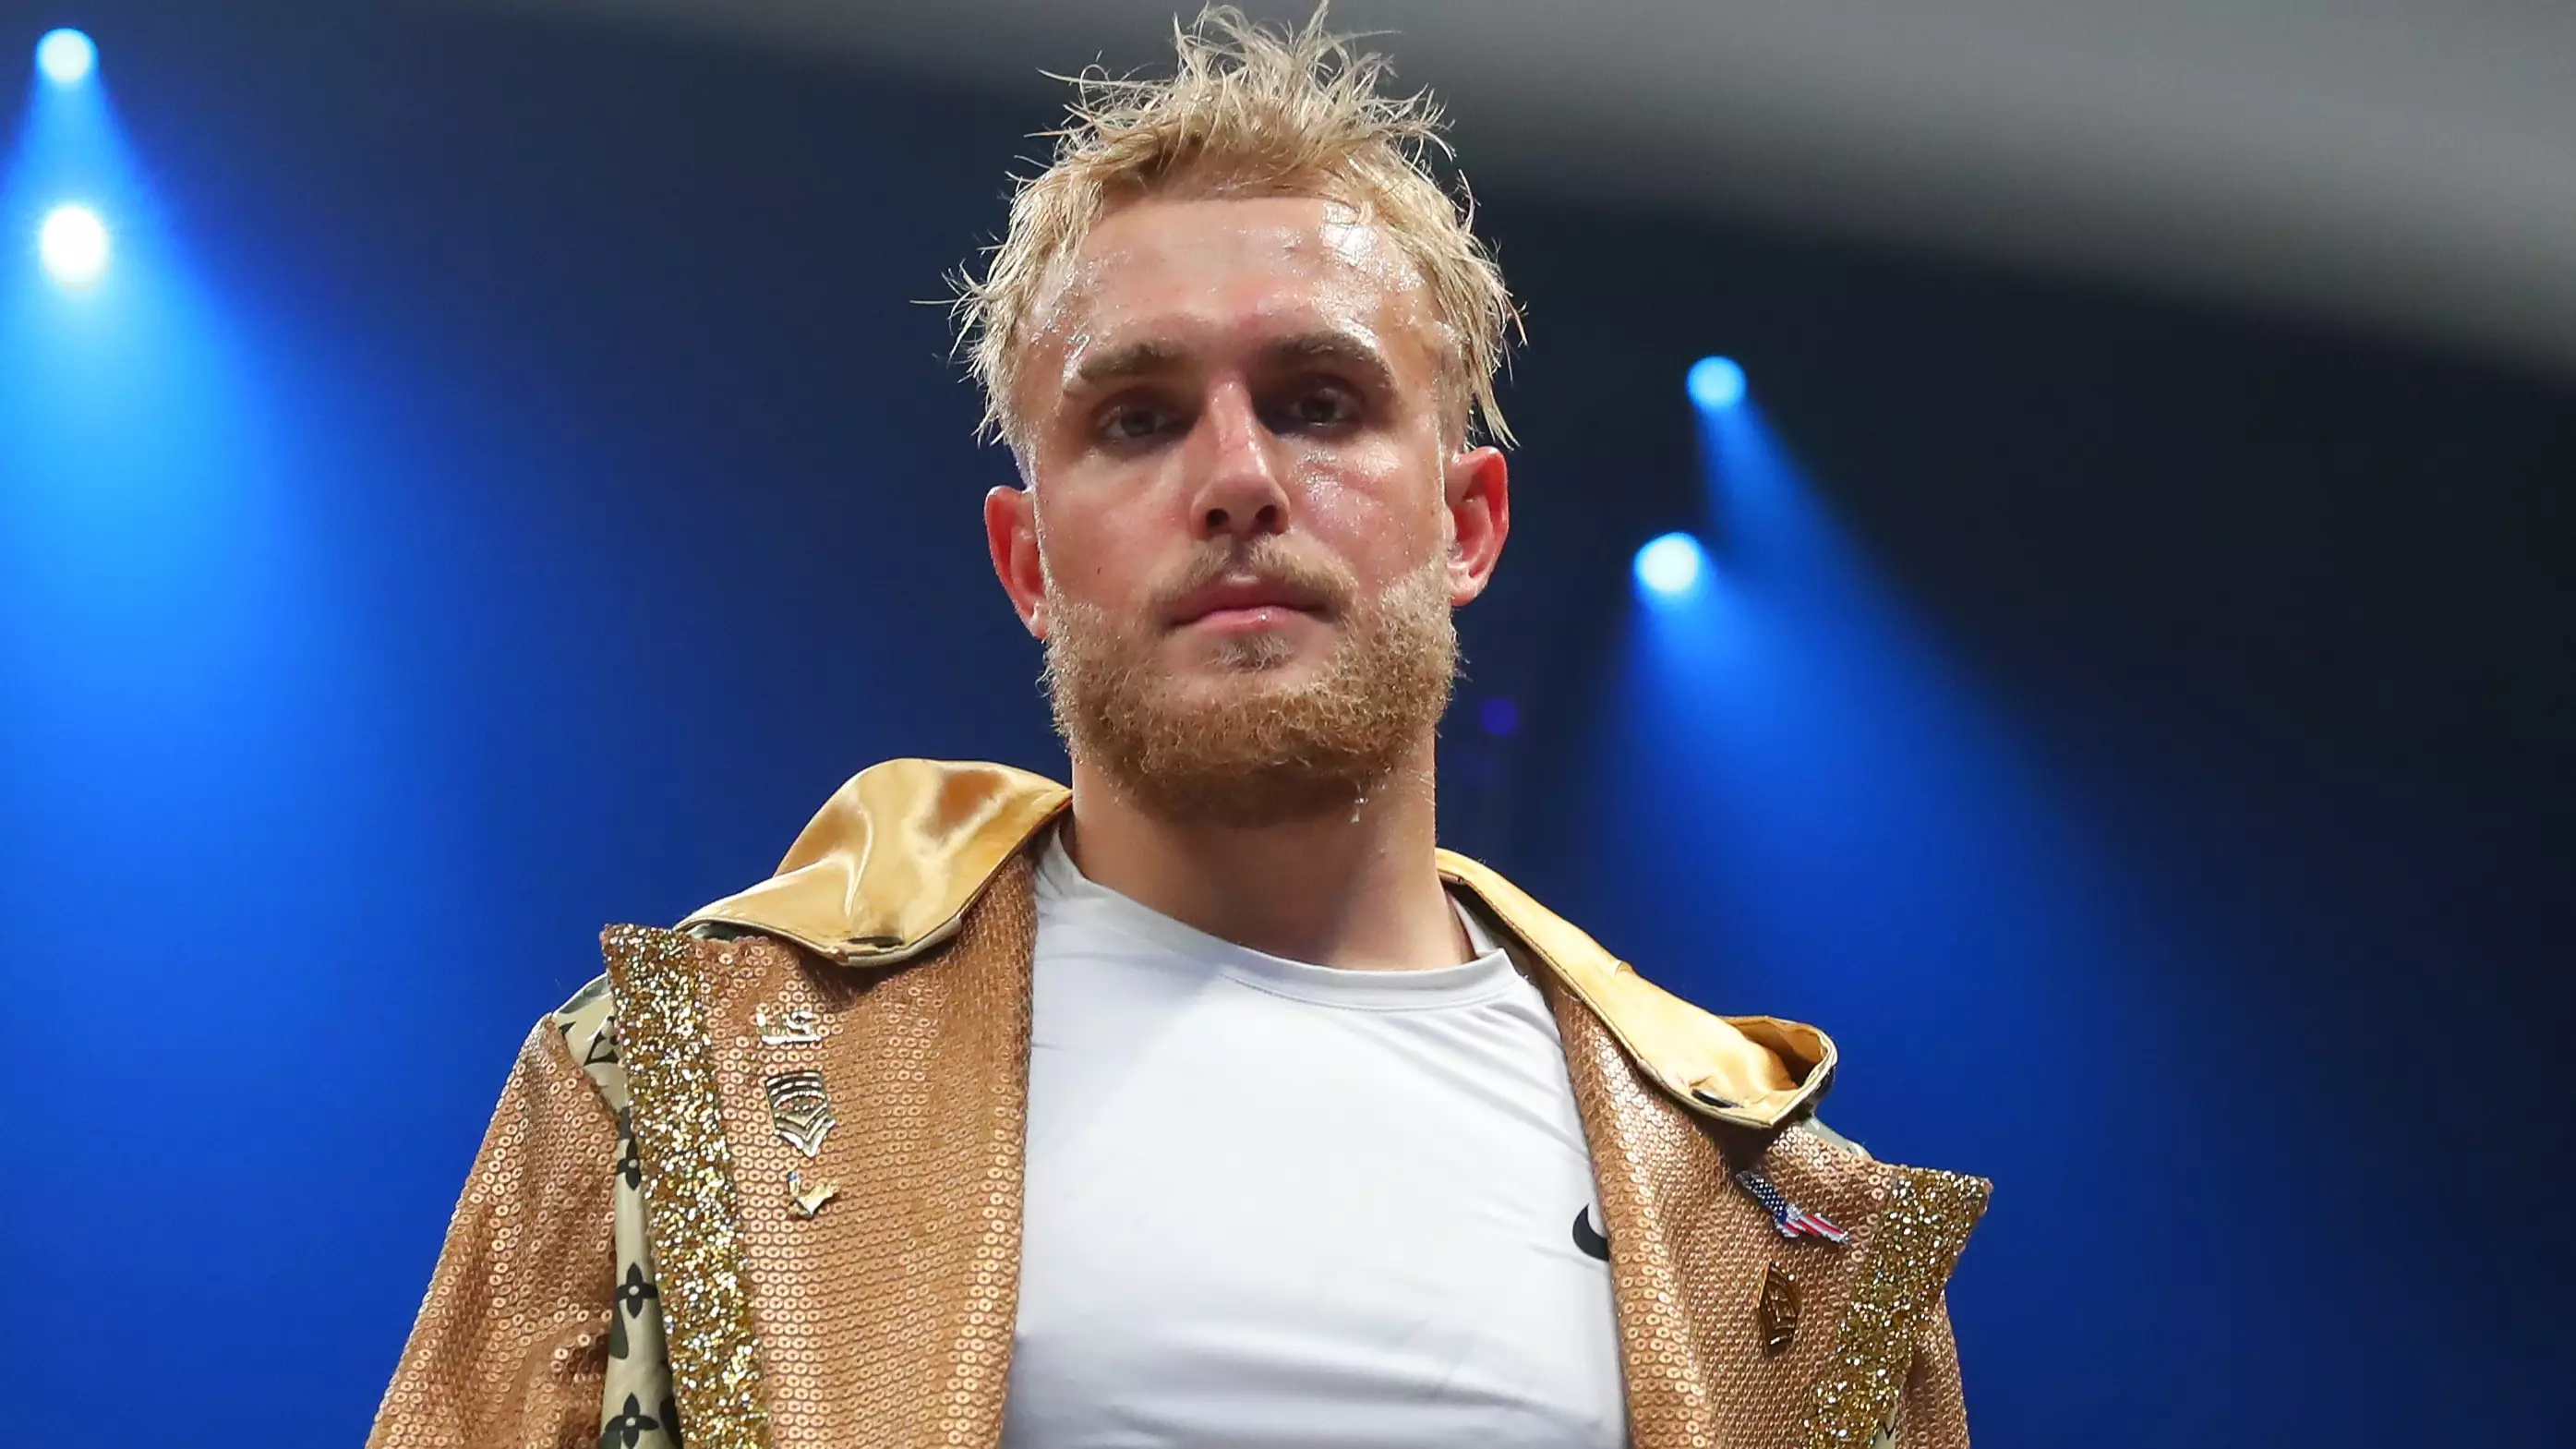 Jake Paul Says He Already Has Early Signs Of Brain Damage From Boxing